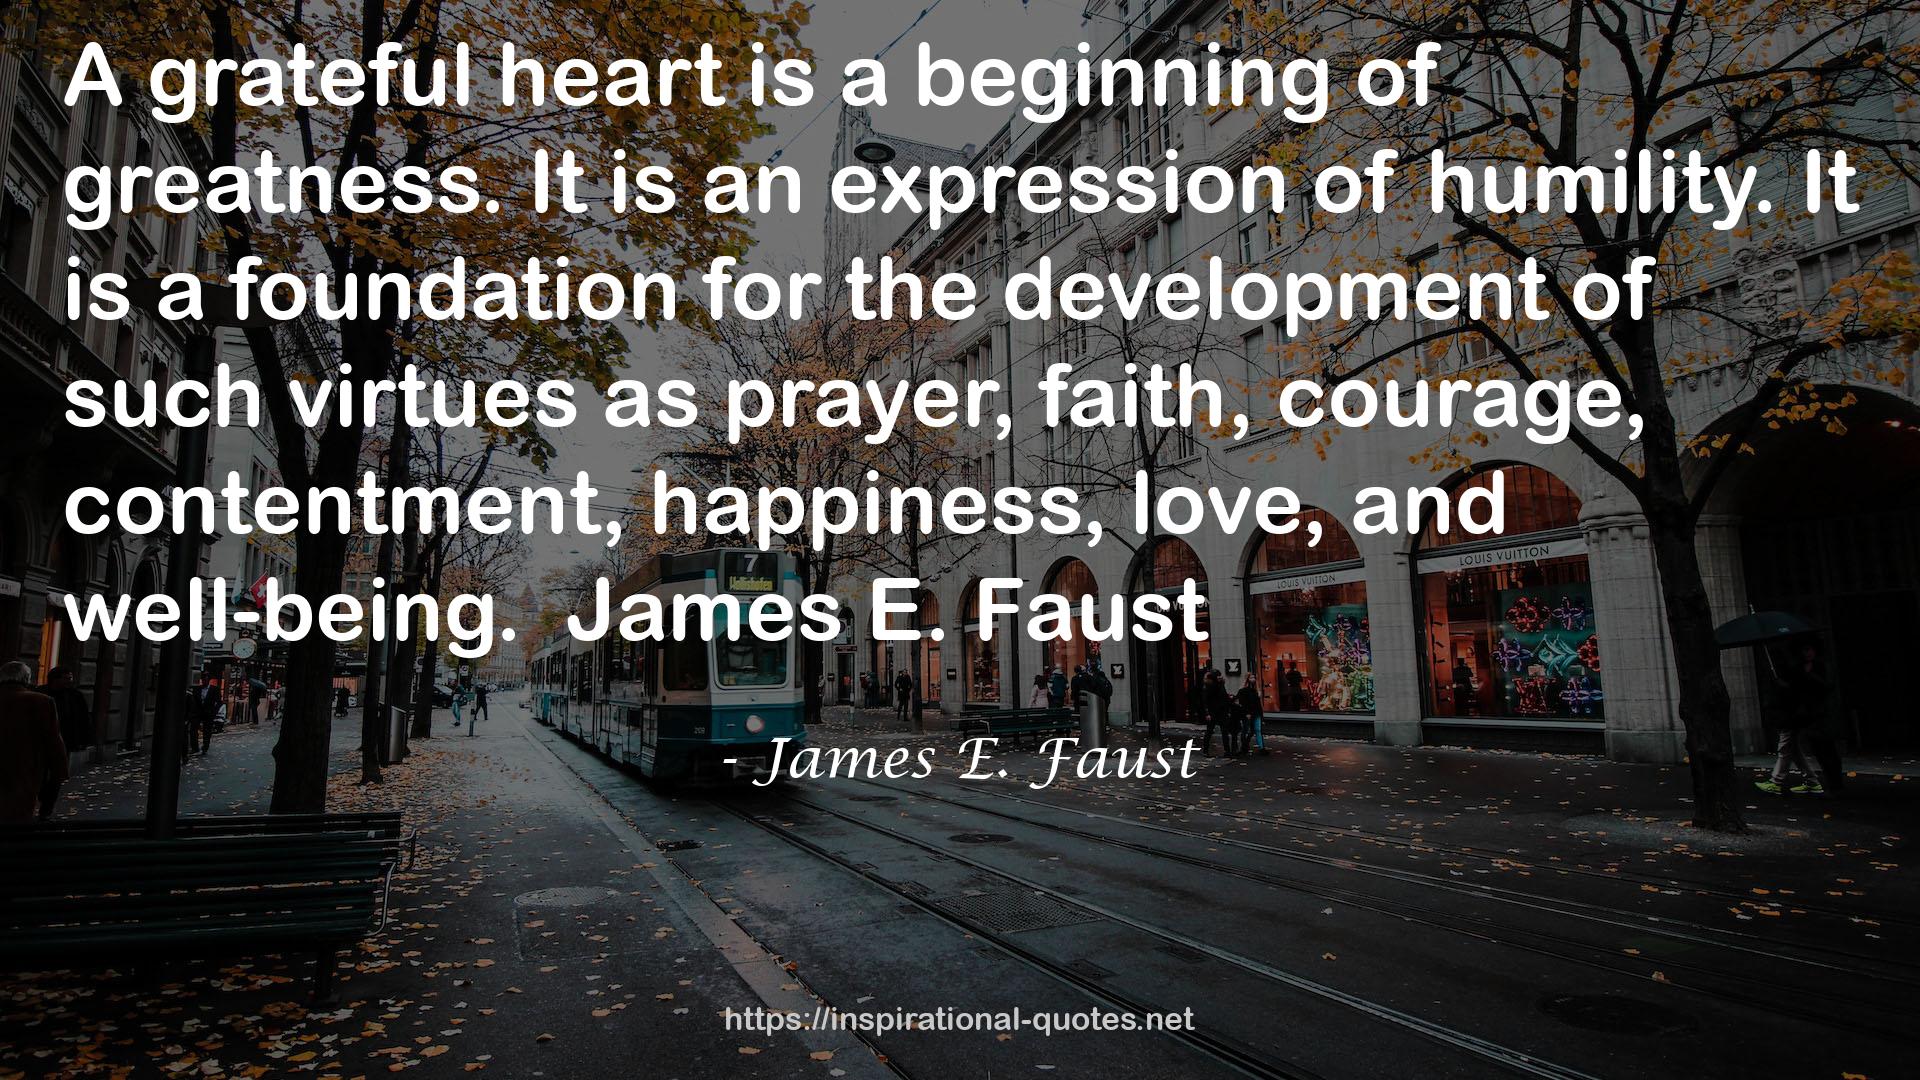 James E. Faust QUOTES